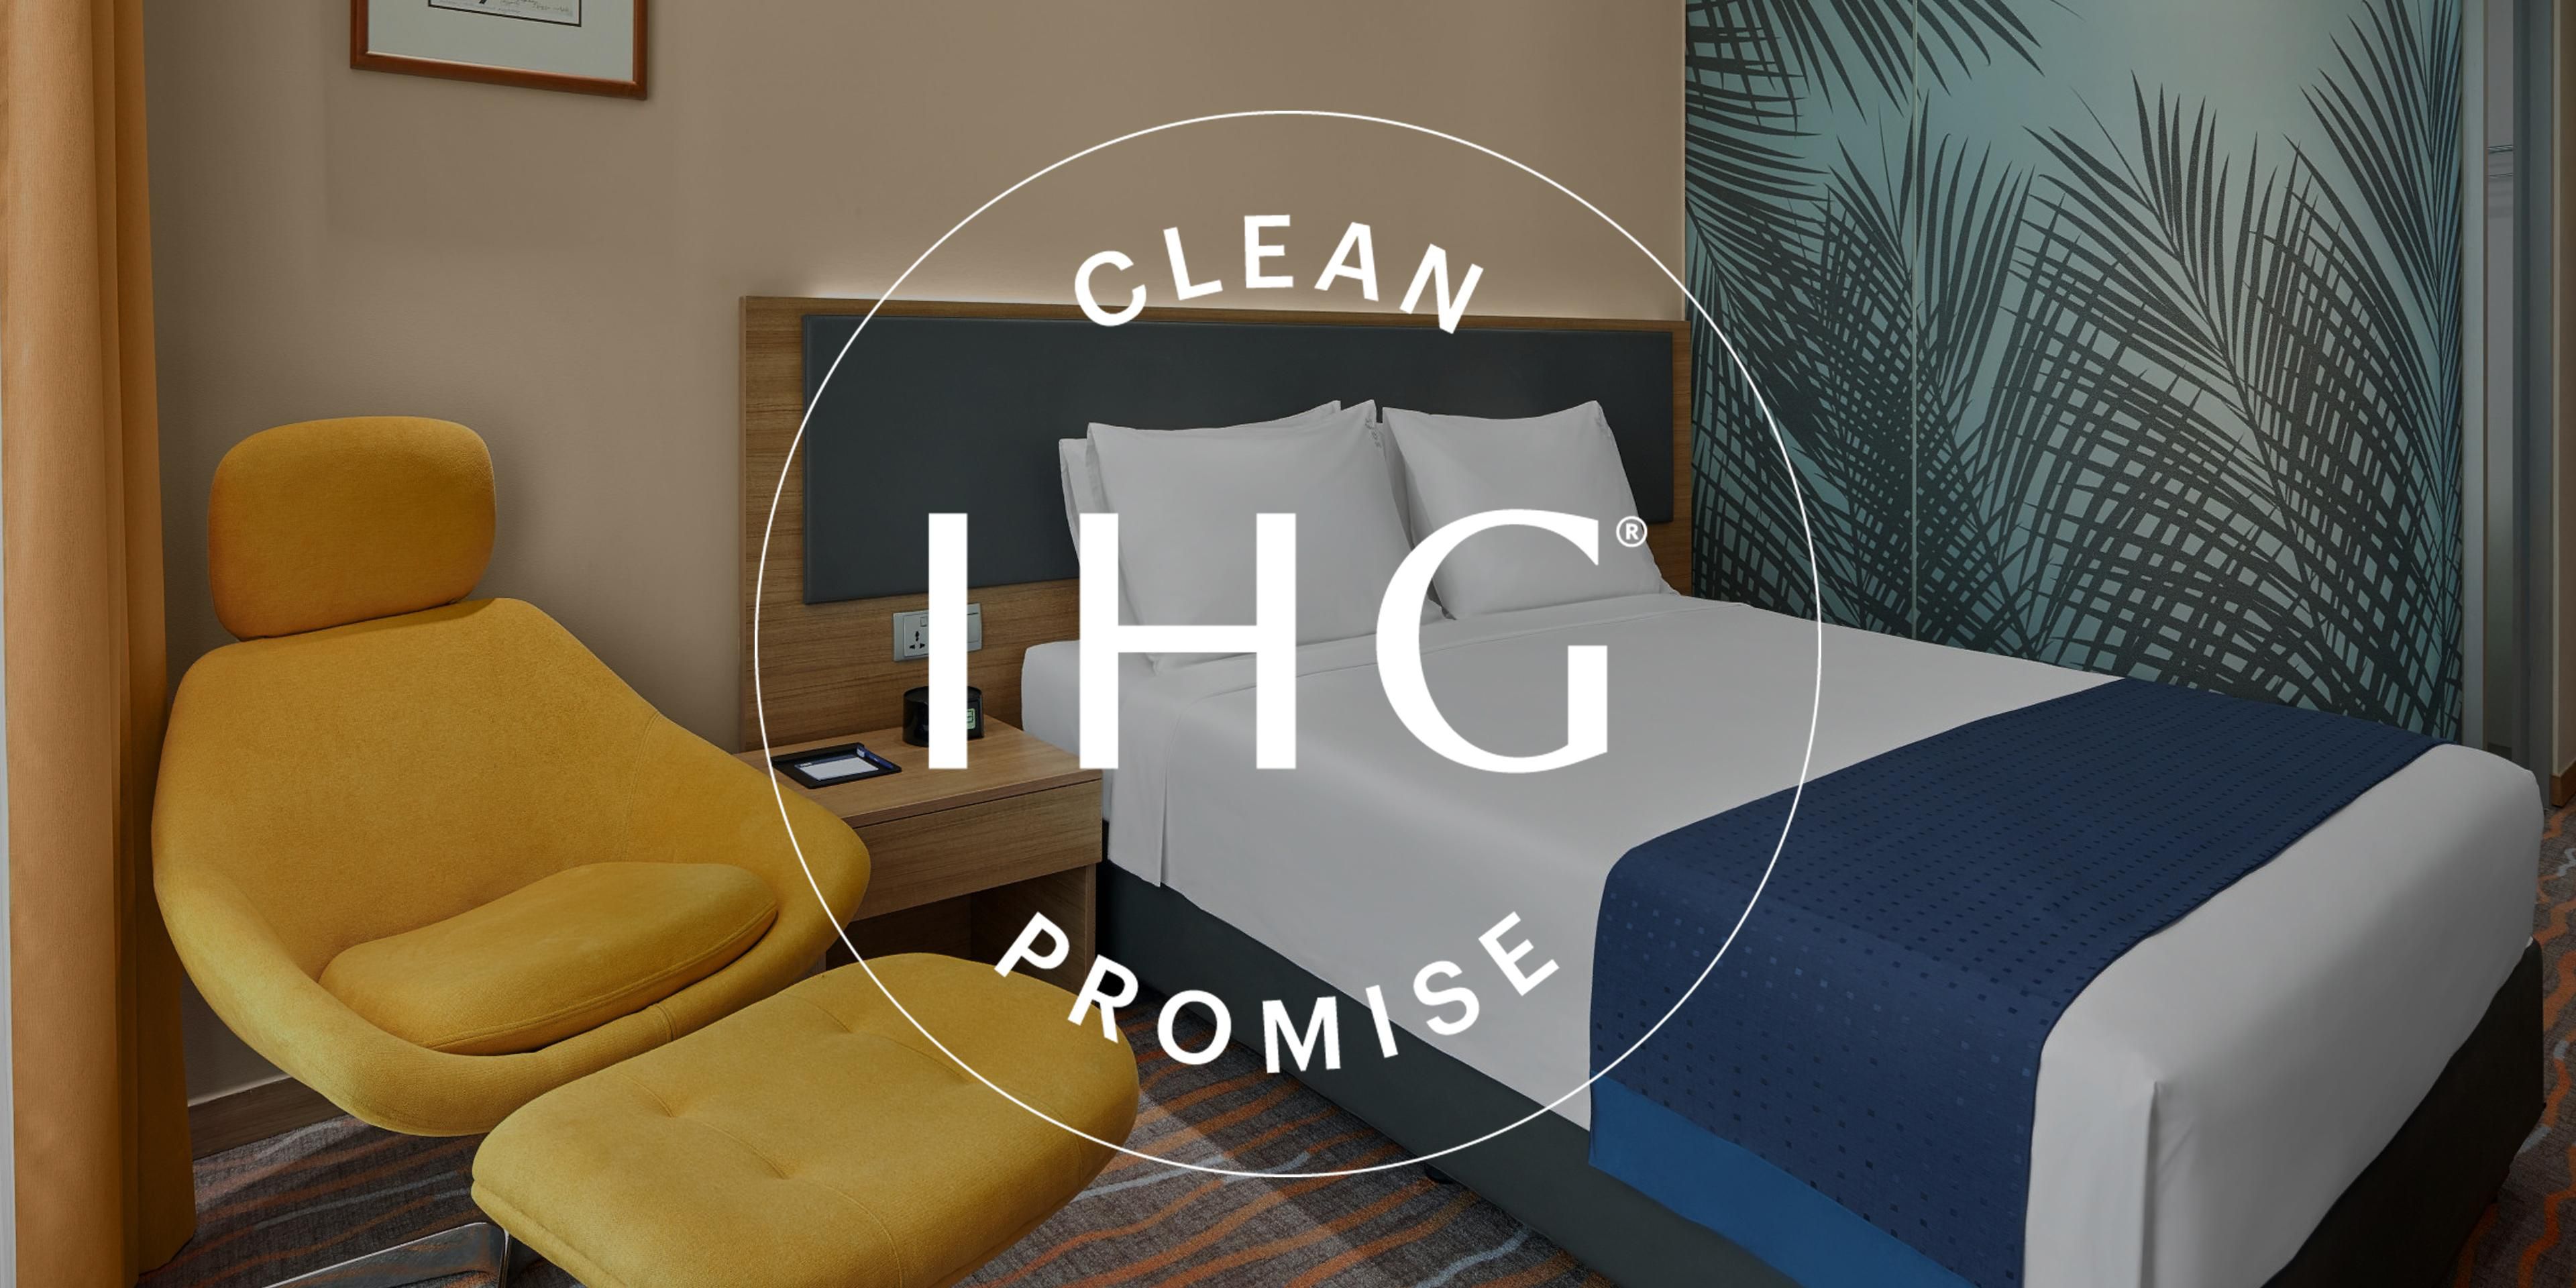 Good isn’t good enough; we’re committed to a high level of cleanliness. That means clean, well-maintained and clutter-free rooms that meet our standards. If this isn’t what you find when you check in, then we promise to make it right.